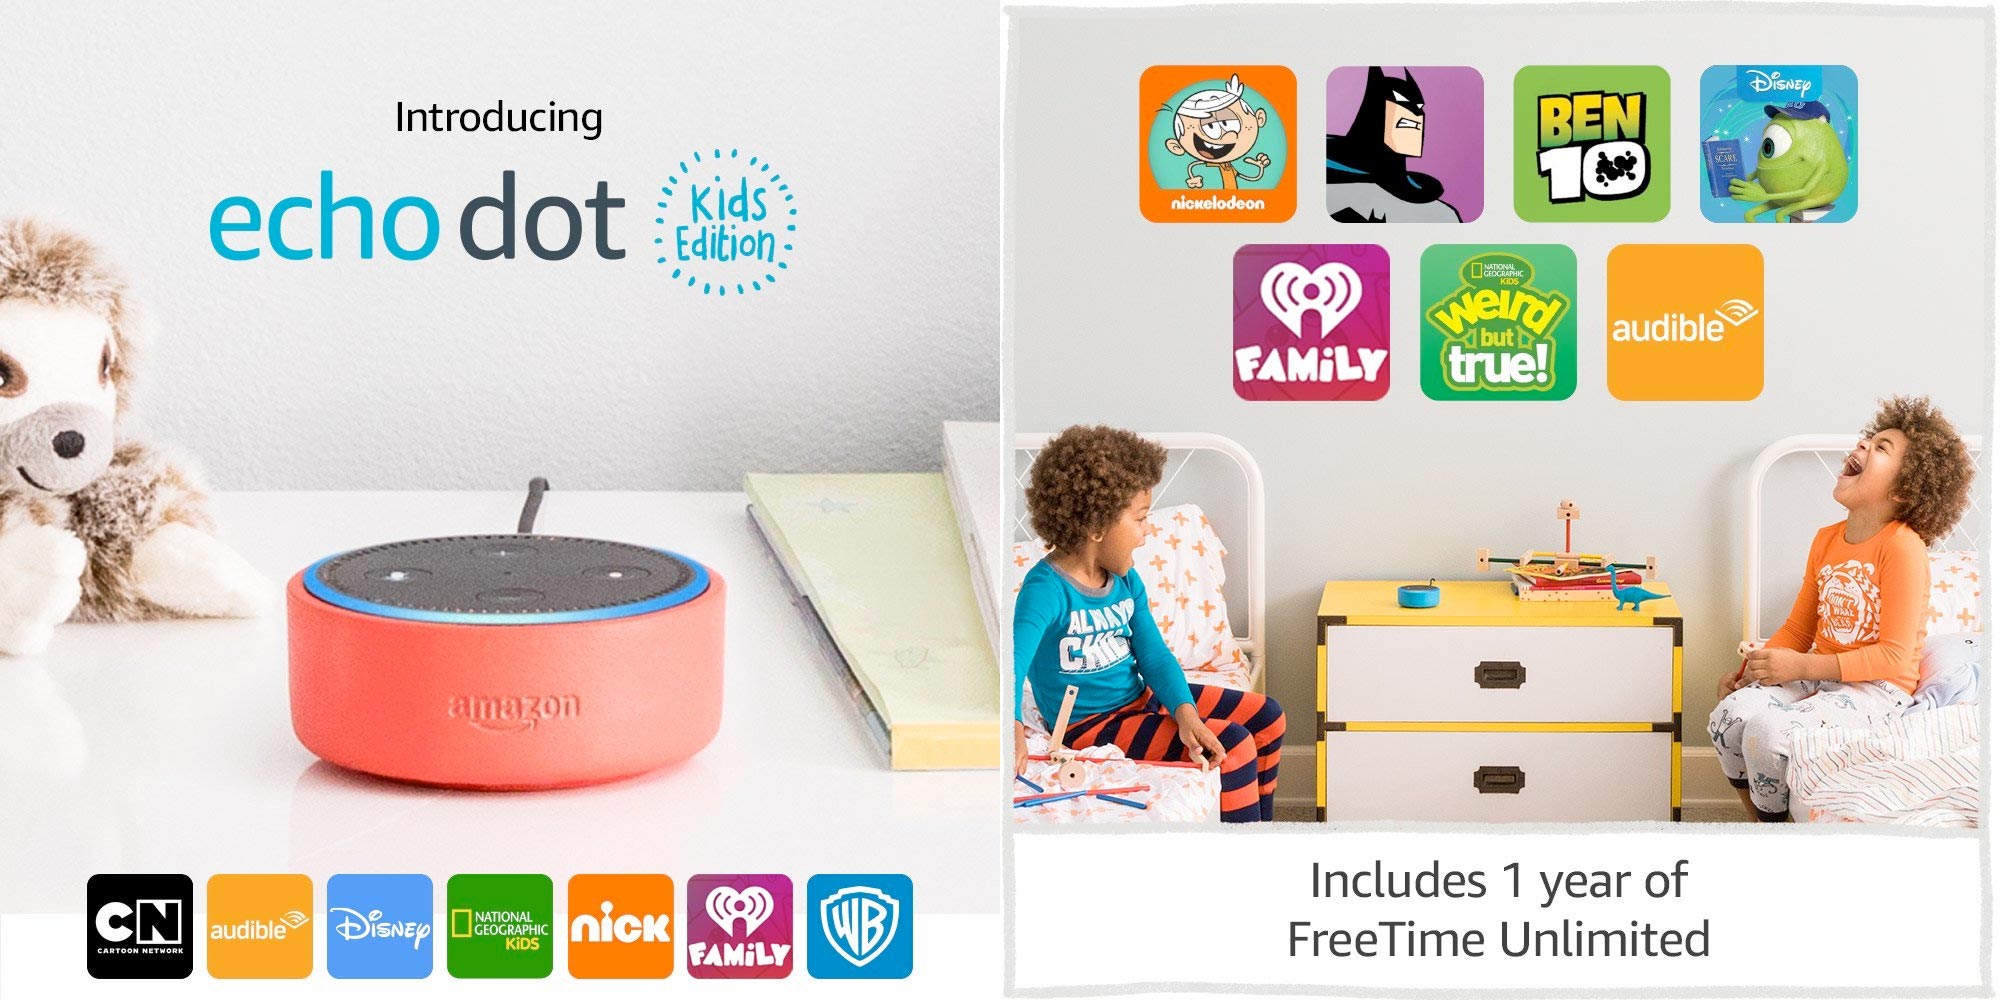 https://9to5toys.com/wp-content/uploads/sites/5/2018/04/amazon-echo-dot-for-kids-and-freetime-unlimited1.jpg